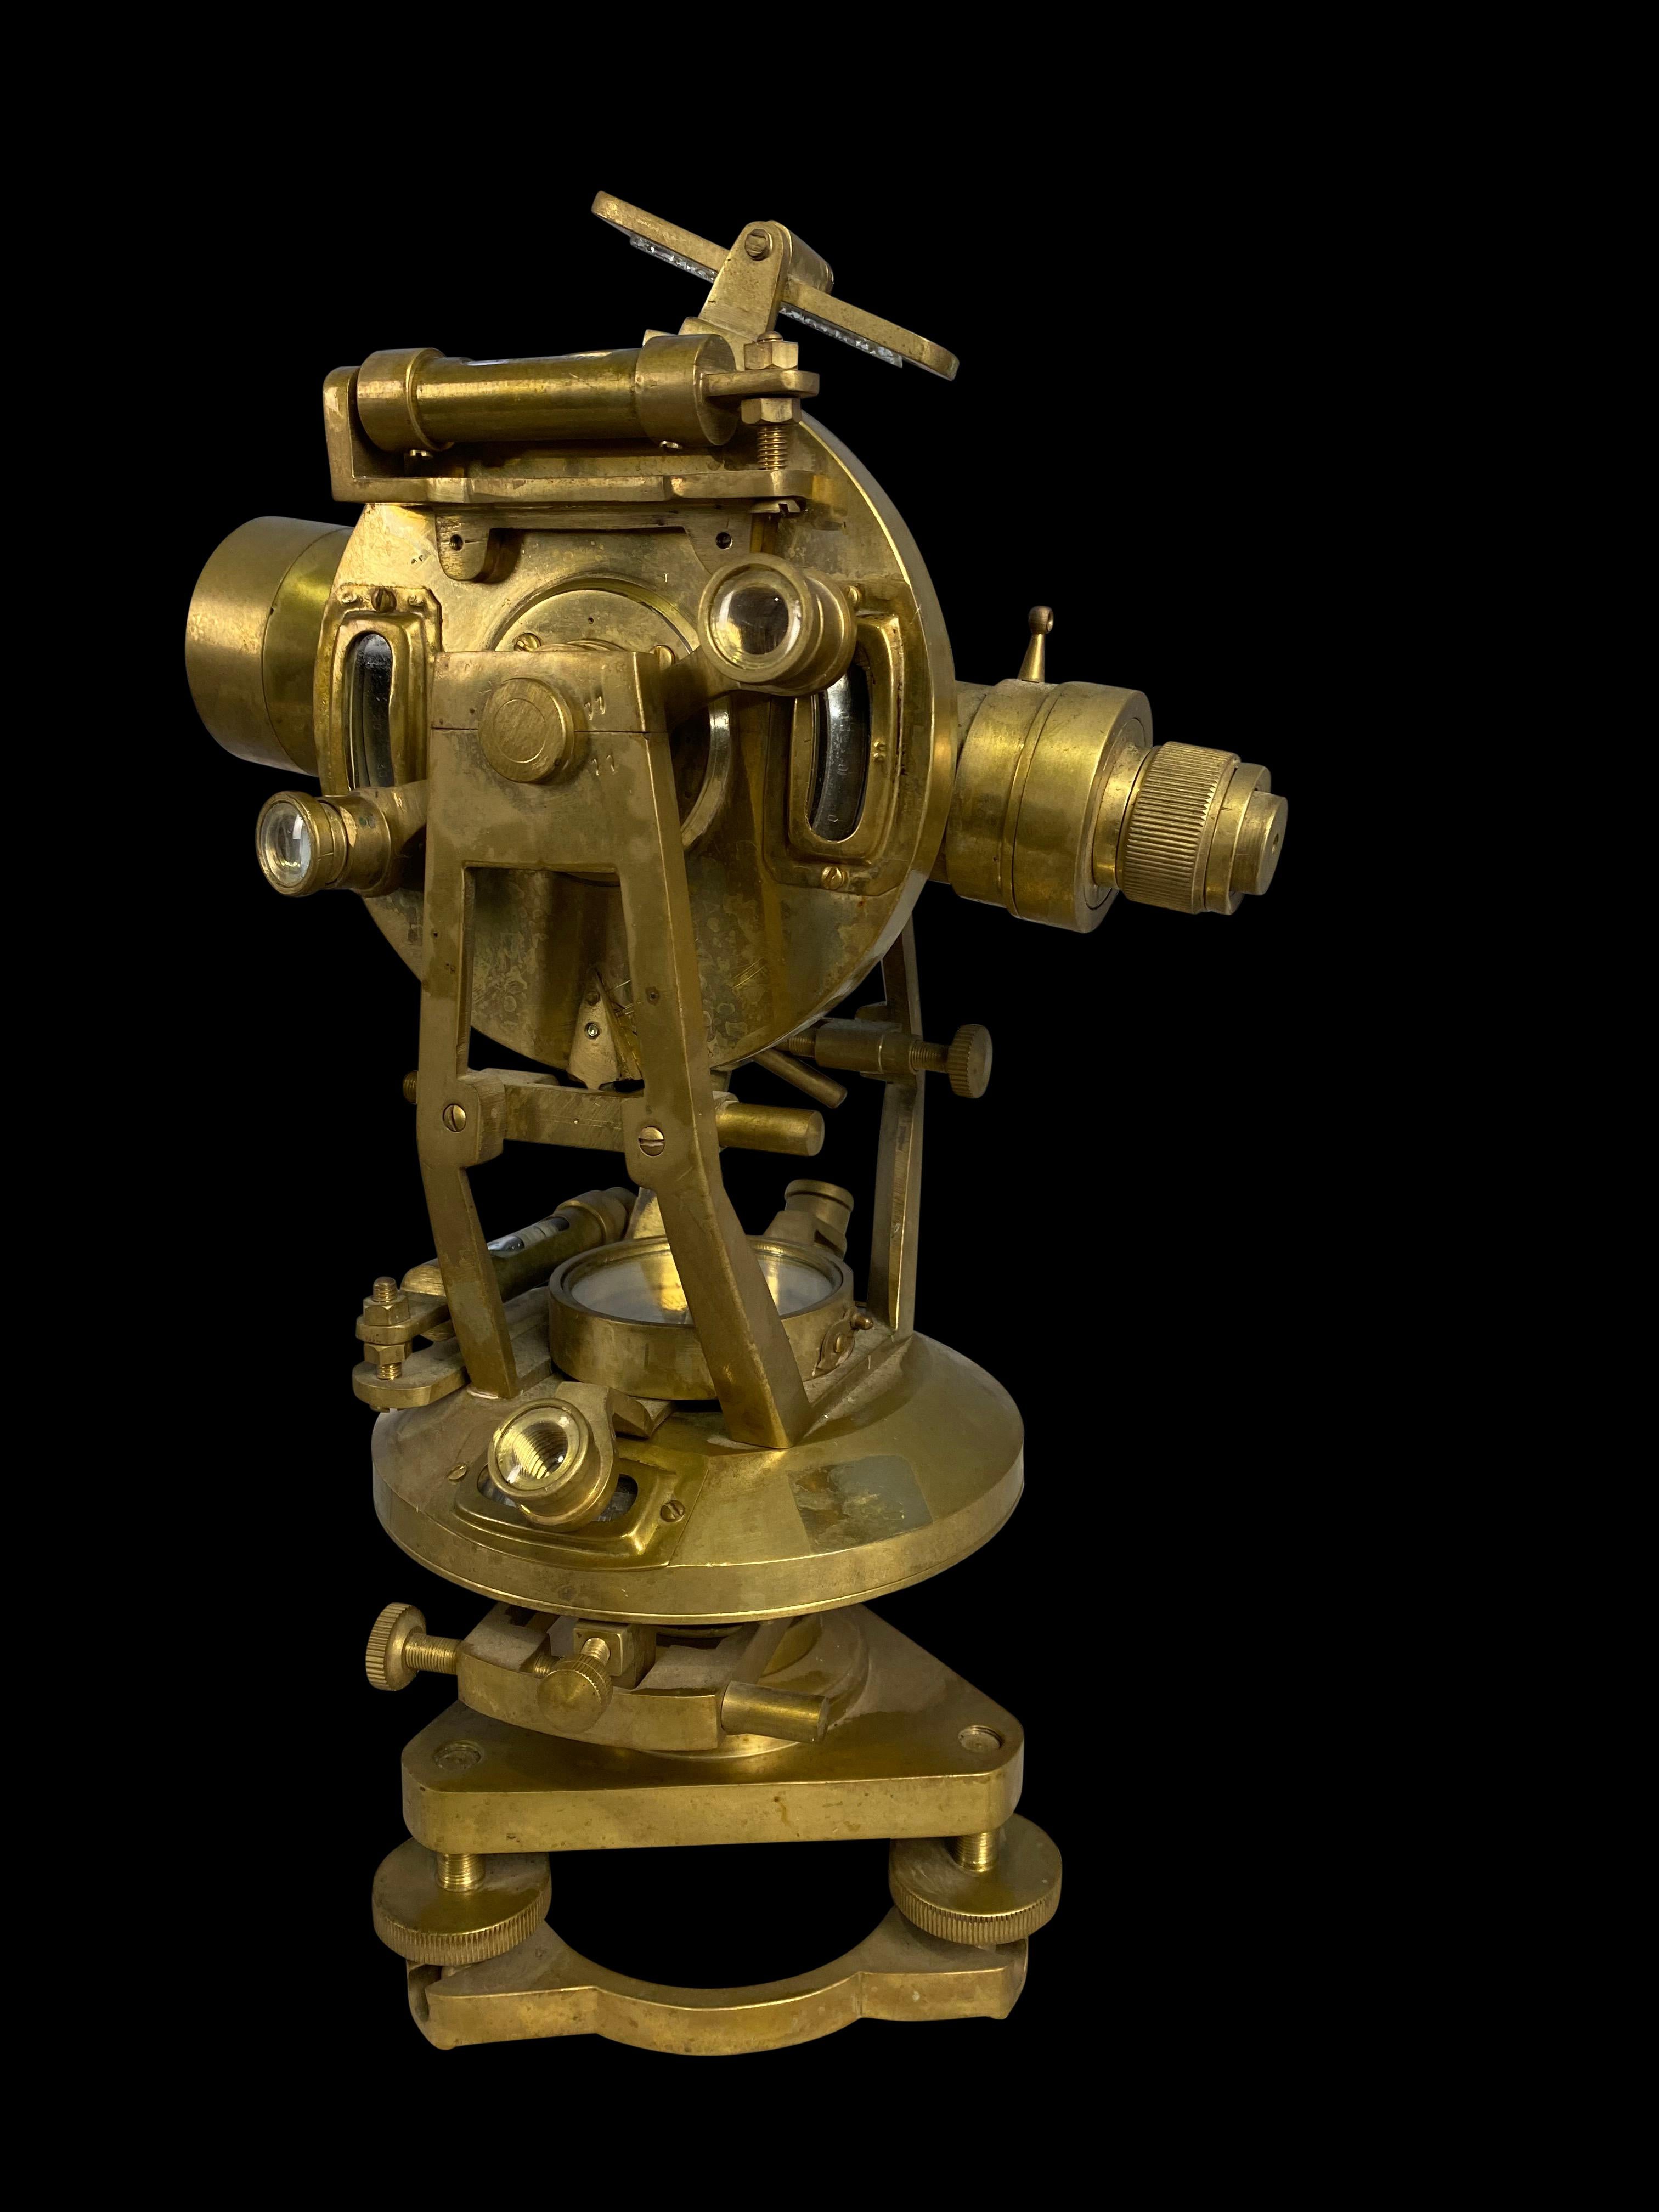 theodolite used for